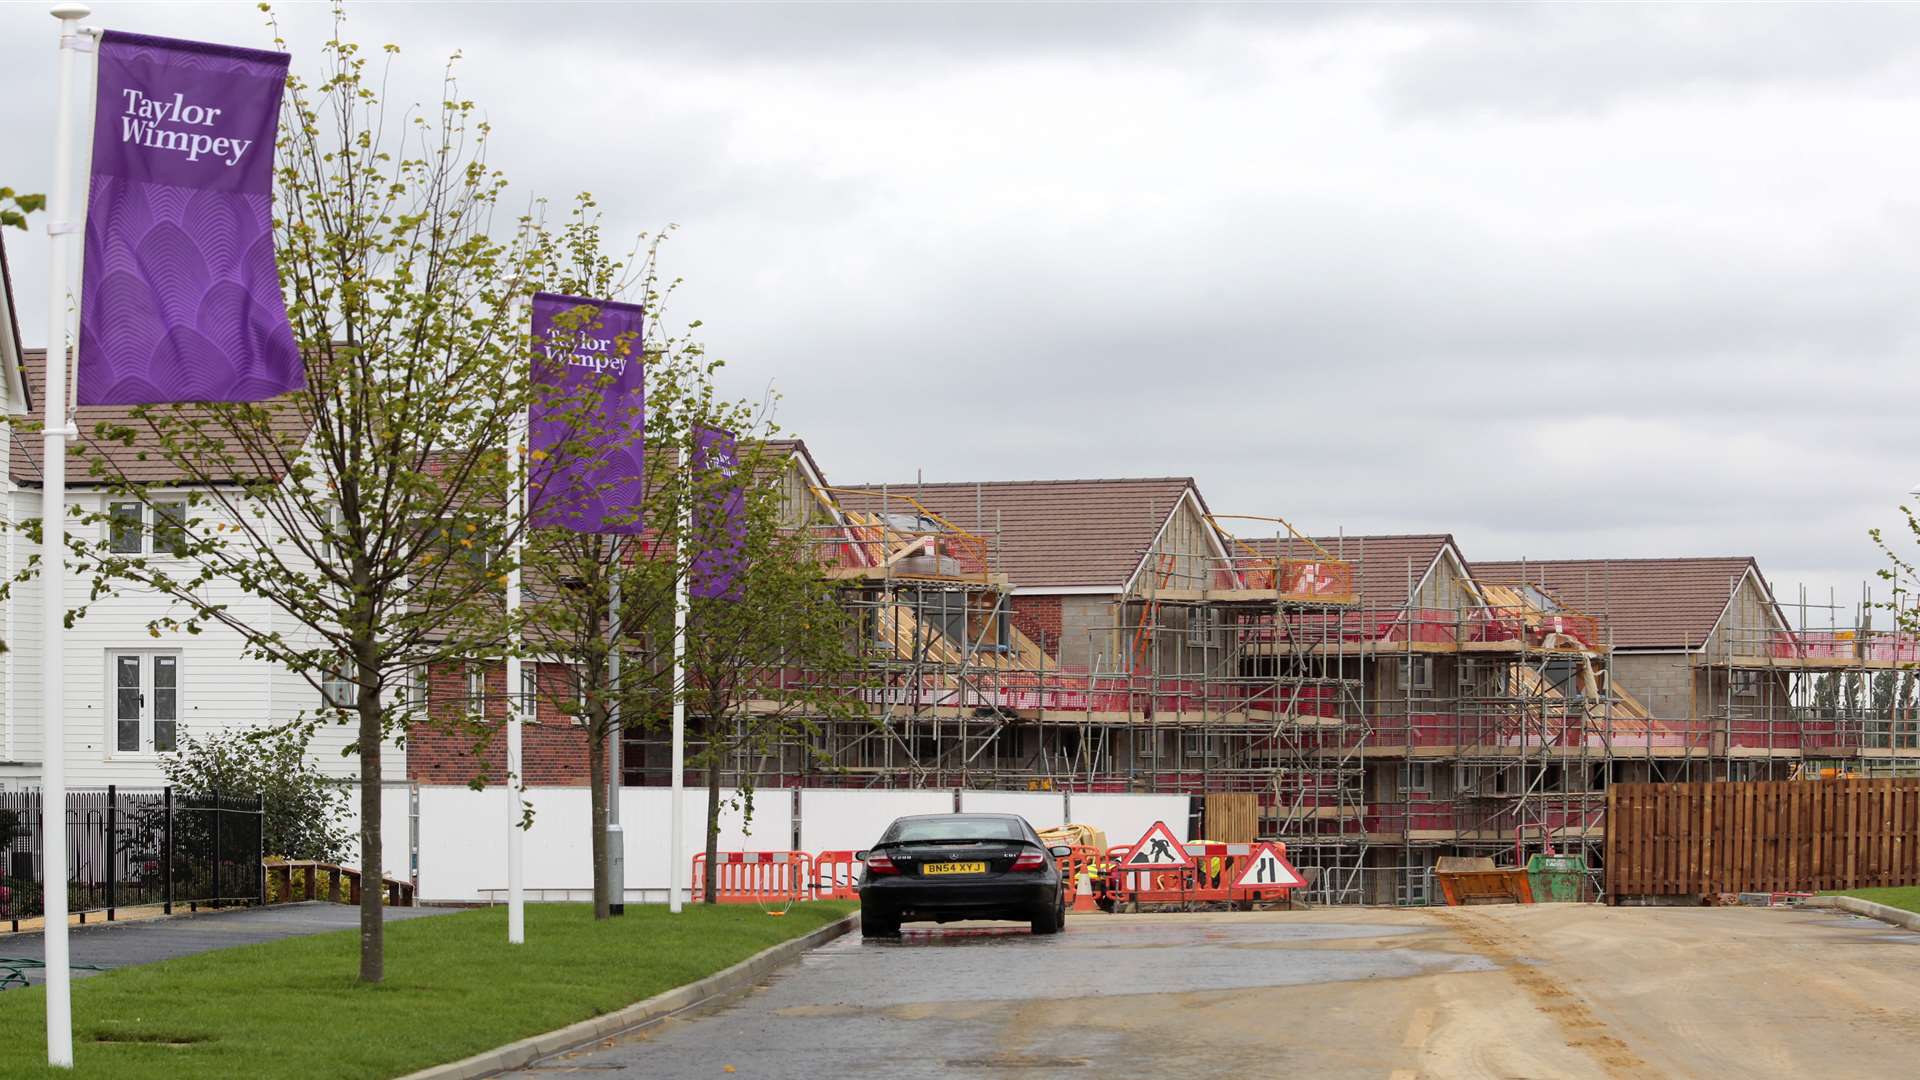 Langley Park development continues to grow as 600 homes are to be built on the site